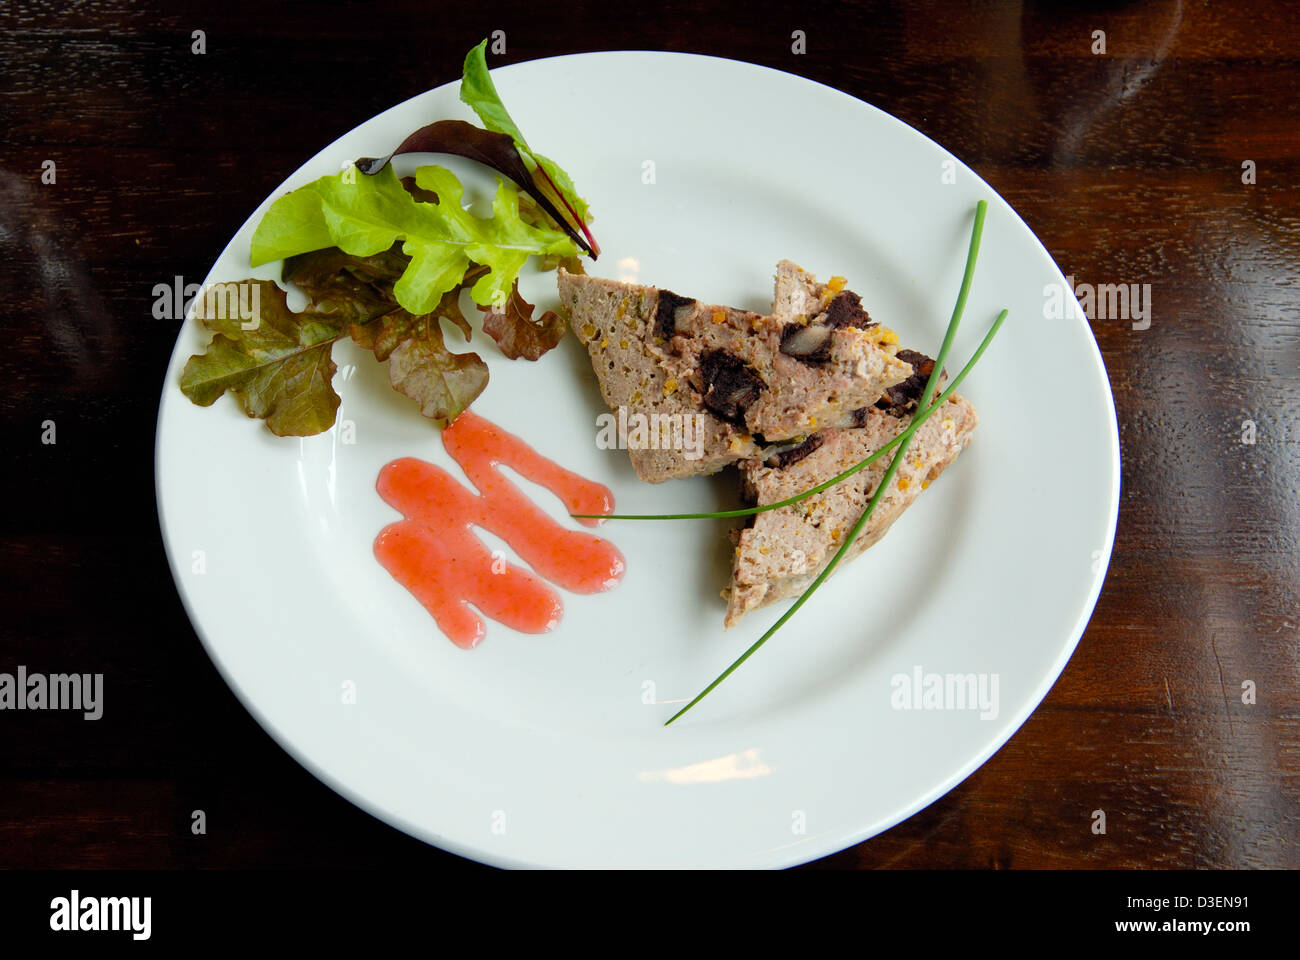 Pork and Corvedale black pudding terrine with spiced plum jelly at ...